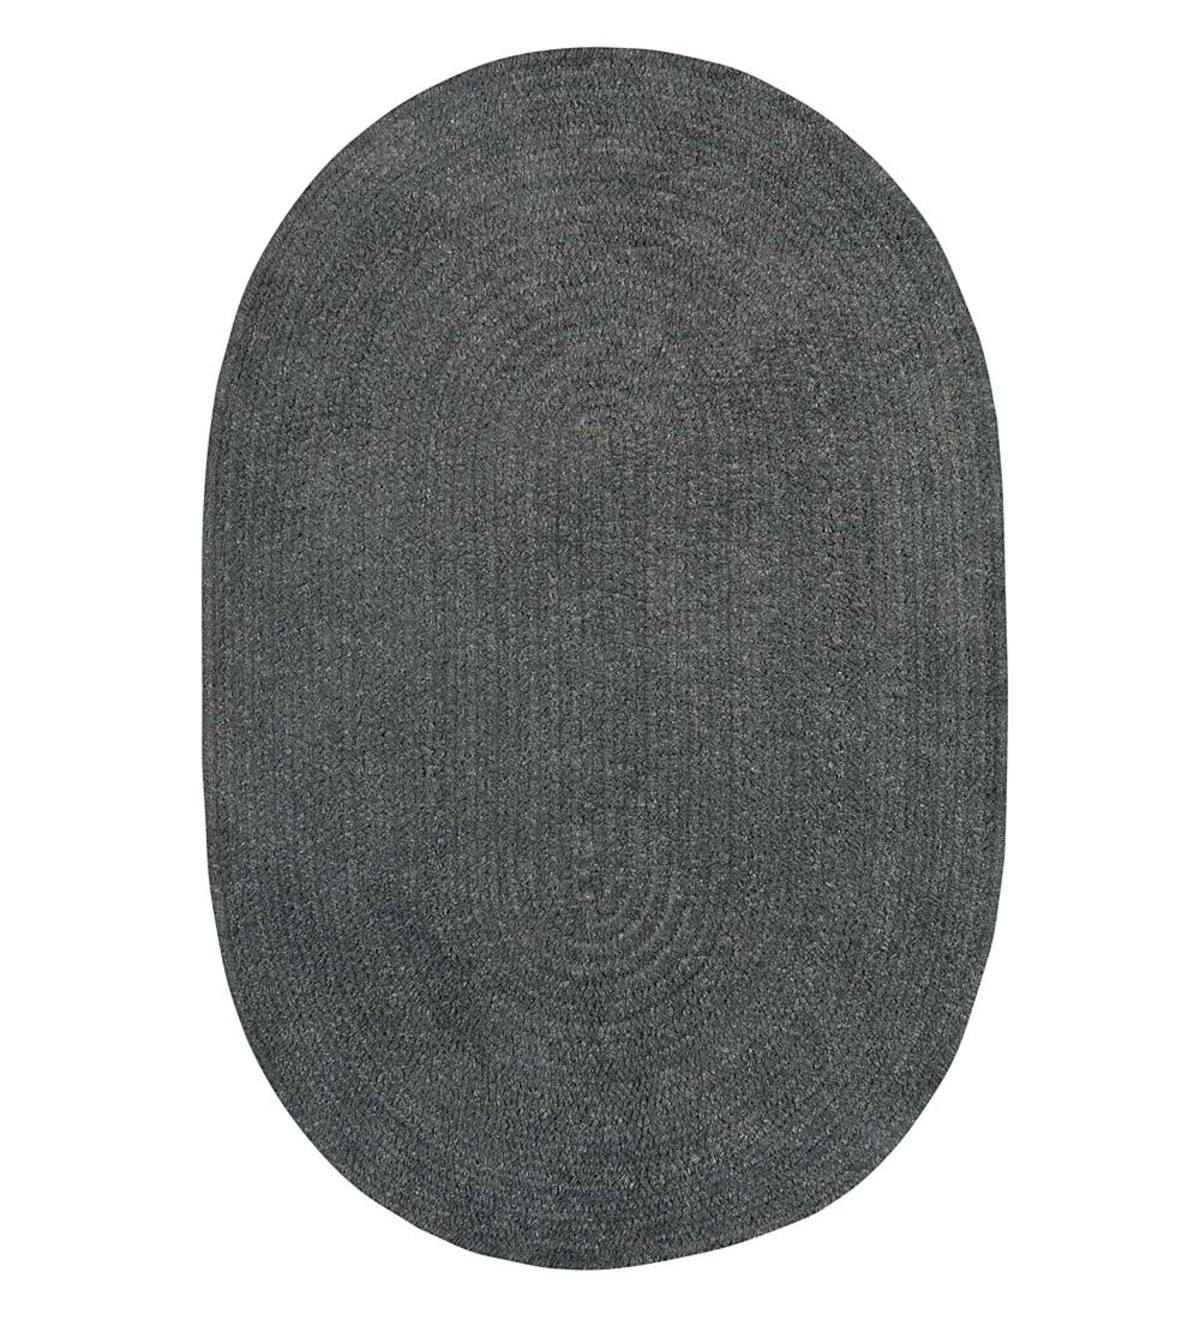 Chenille Oval Braided Area Rug, 9' x 12' - Charcoal